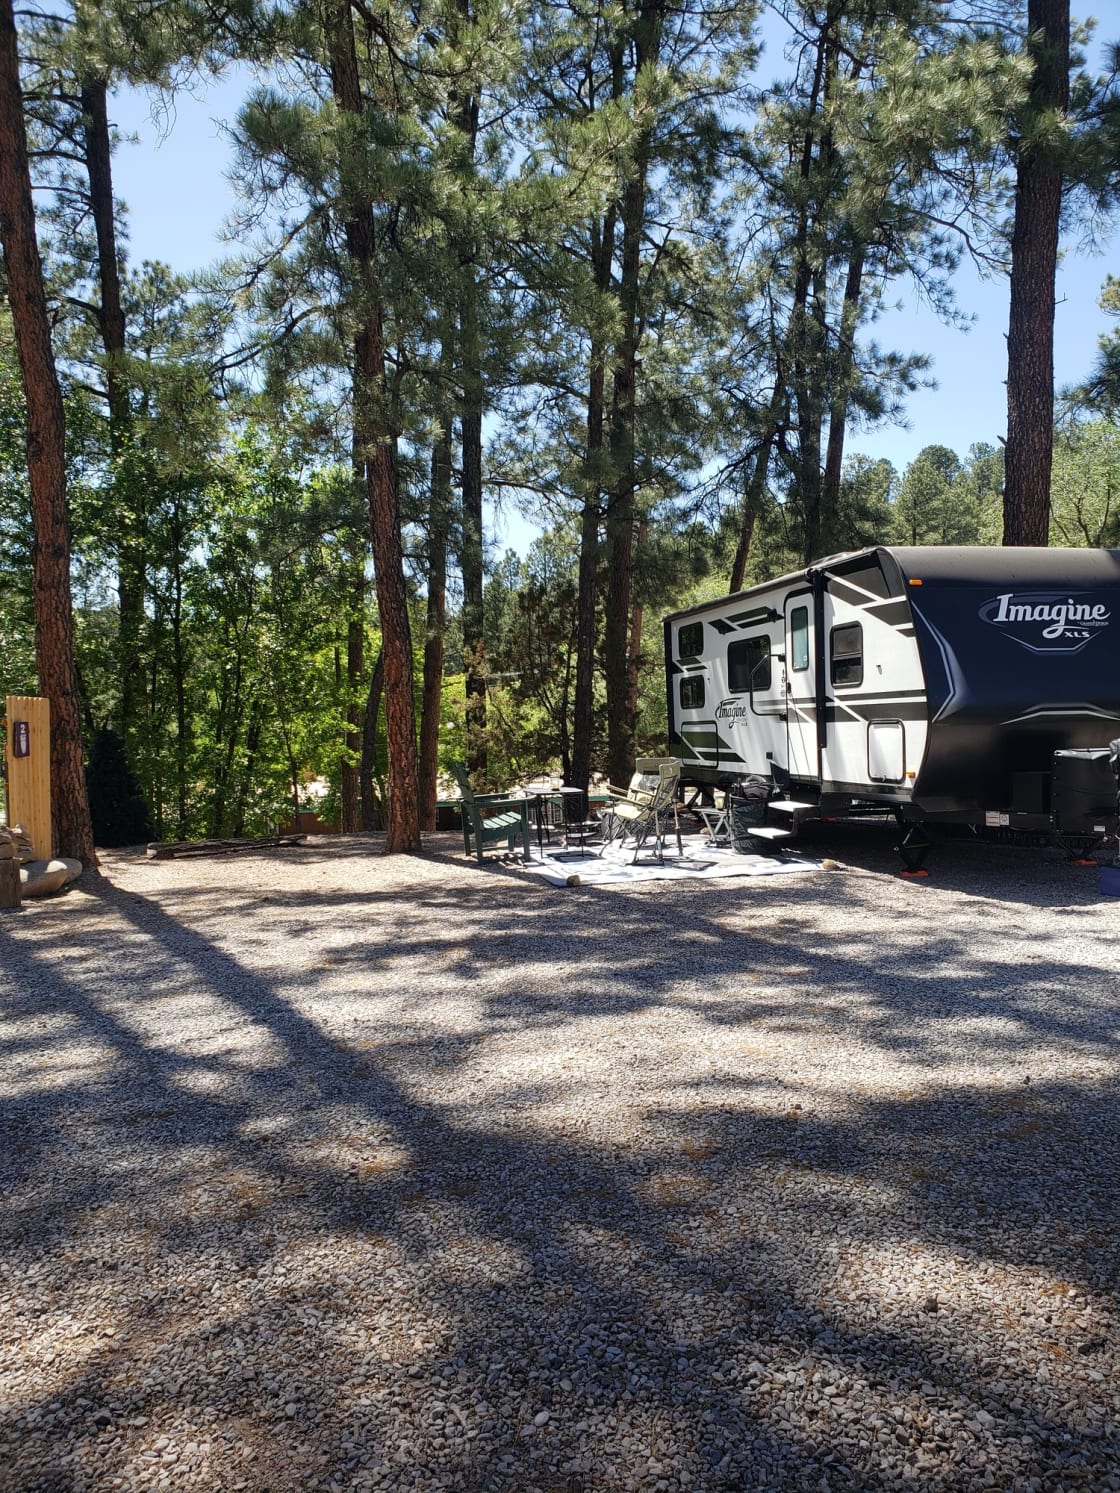 Midtown Mountain Campground and RV